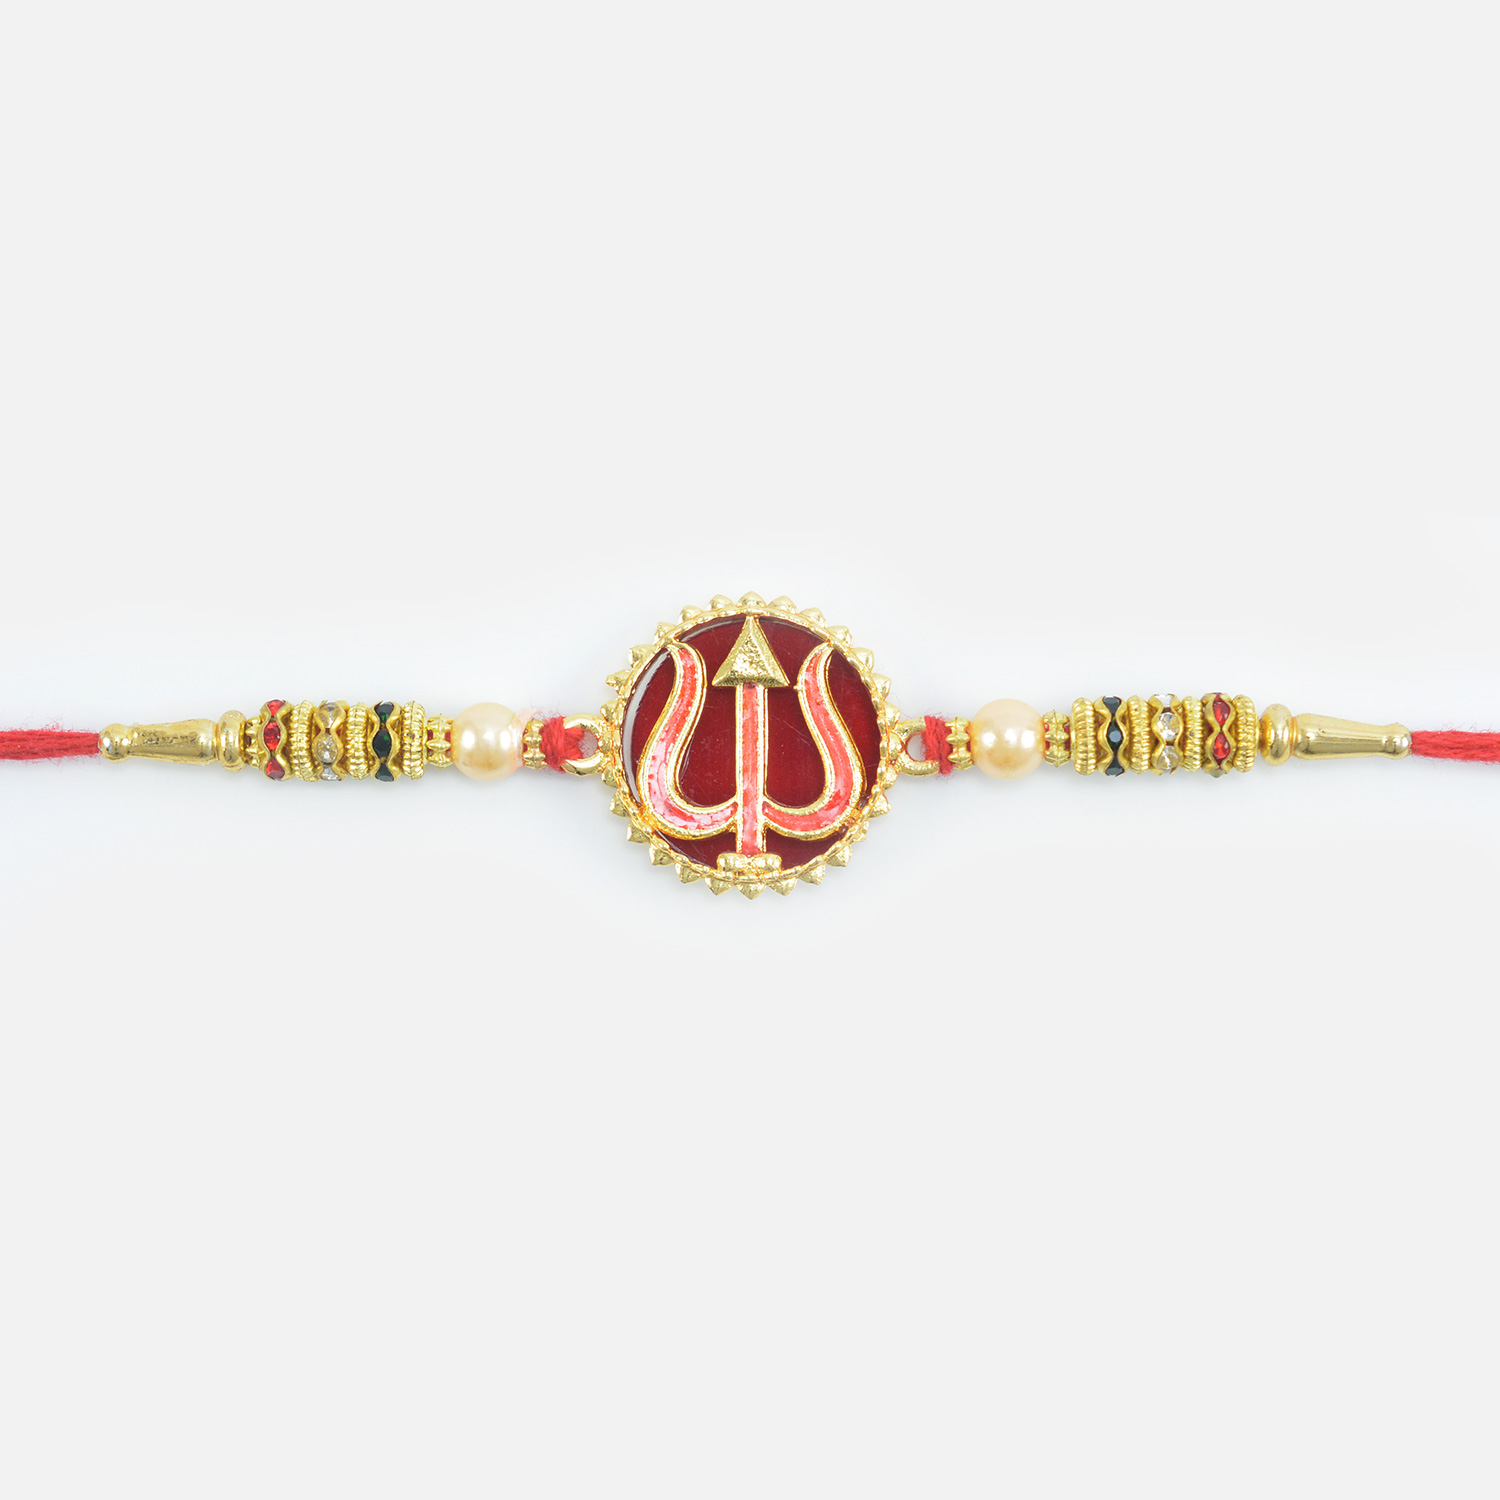 Auspicious Divine Golden and Red Color Trishul Studded Rakhi for Brother 